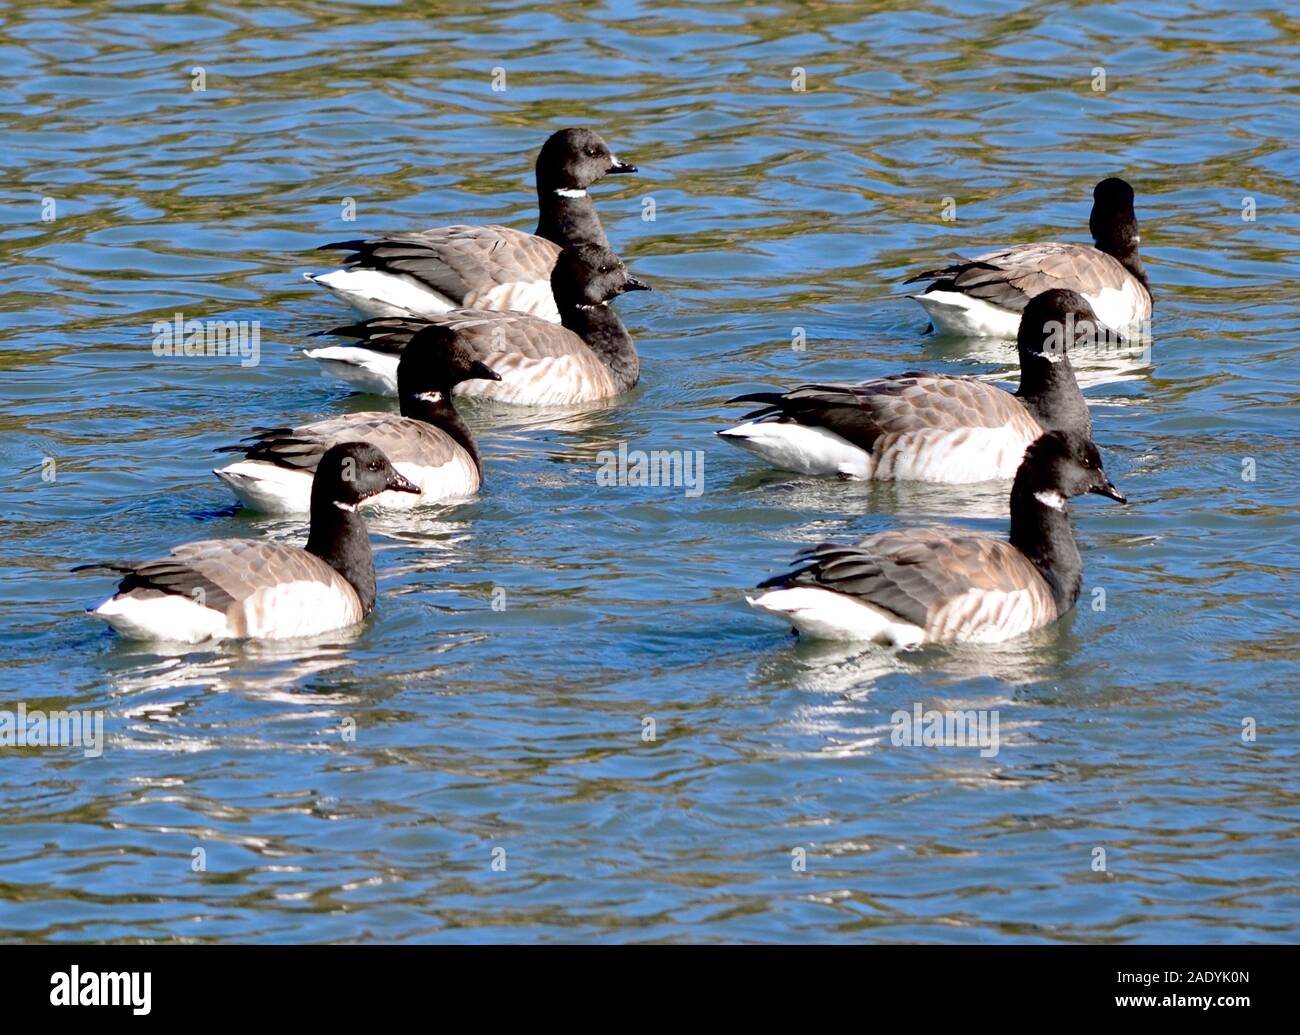 A raft of brants rest in a Long Island harbor after migrating from their Arctic Circle breeding grounds. (Branta bernicla) Stock Photo